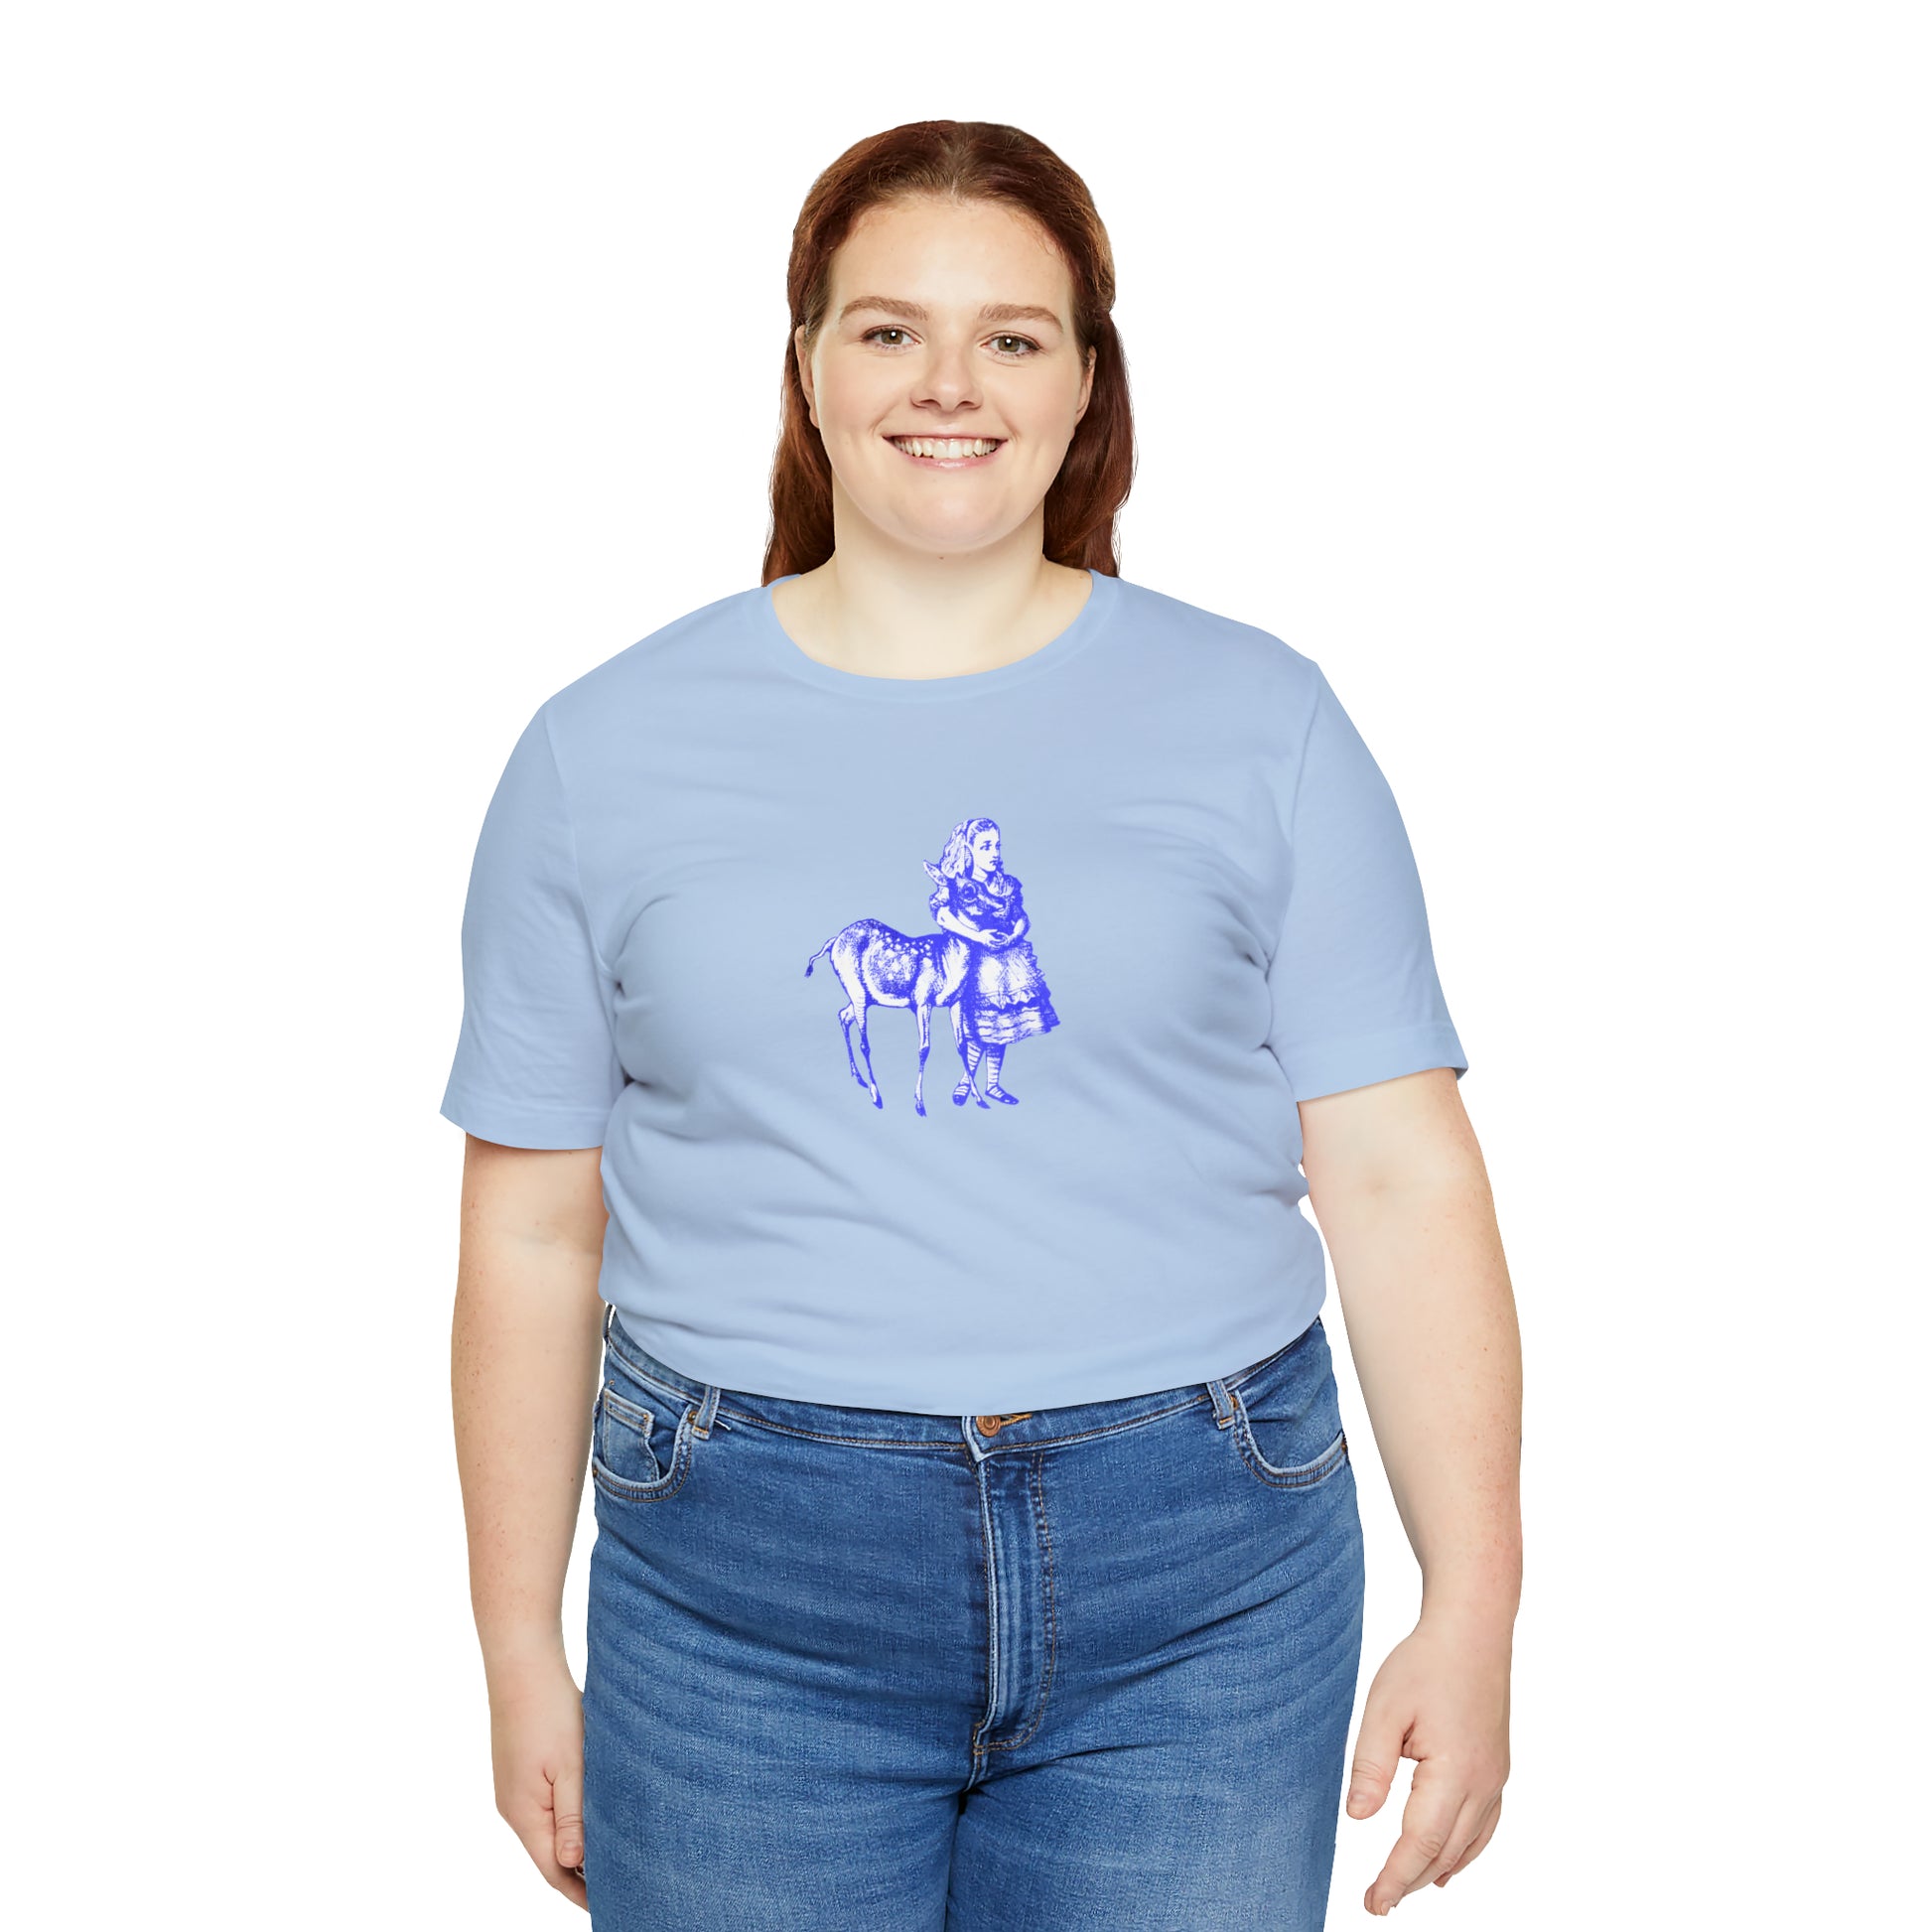 A smiling plus sized woman wearing a blue t-shirt with an illustration of Alice in Wonderland and a baby deer printed in blue.